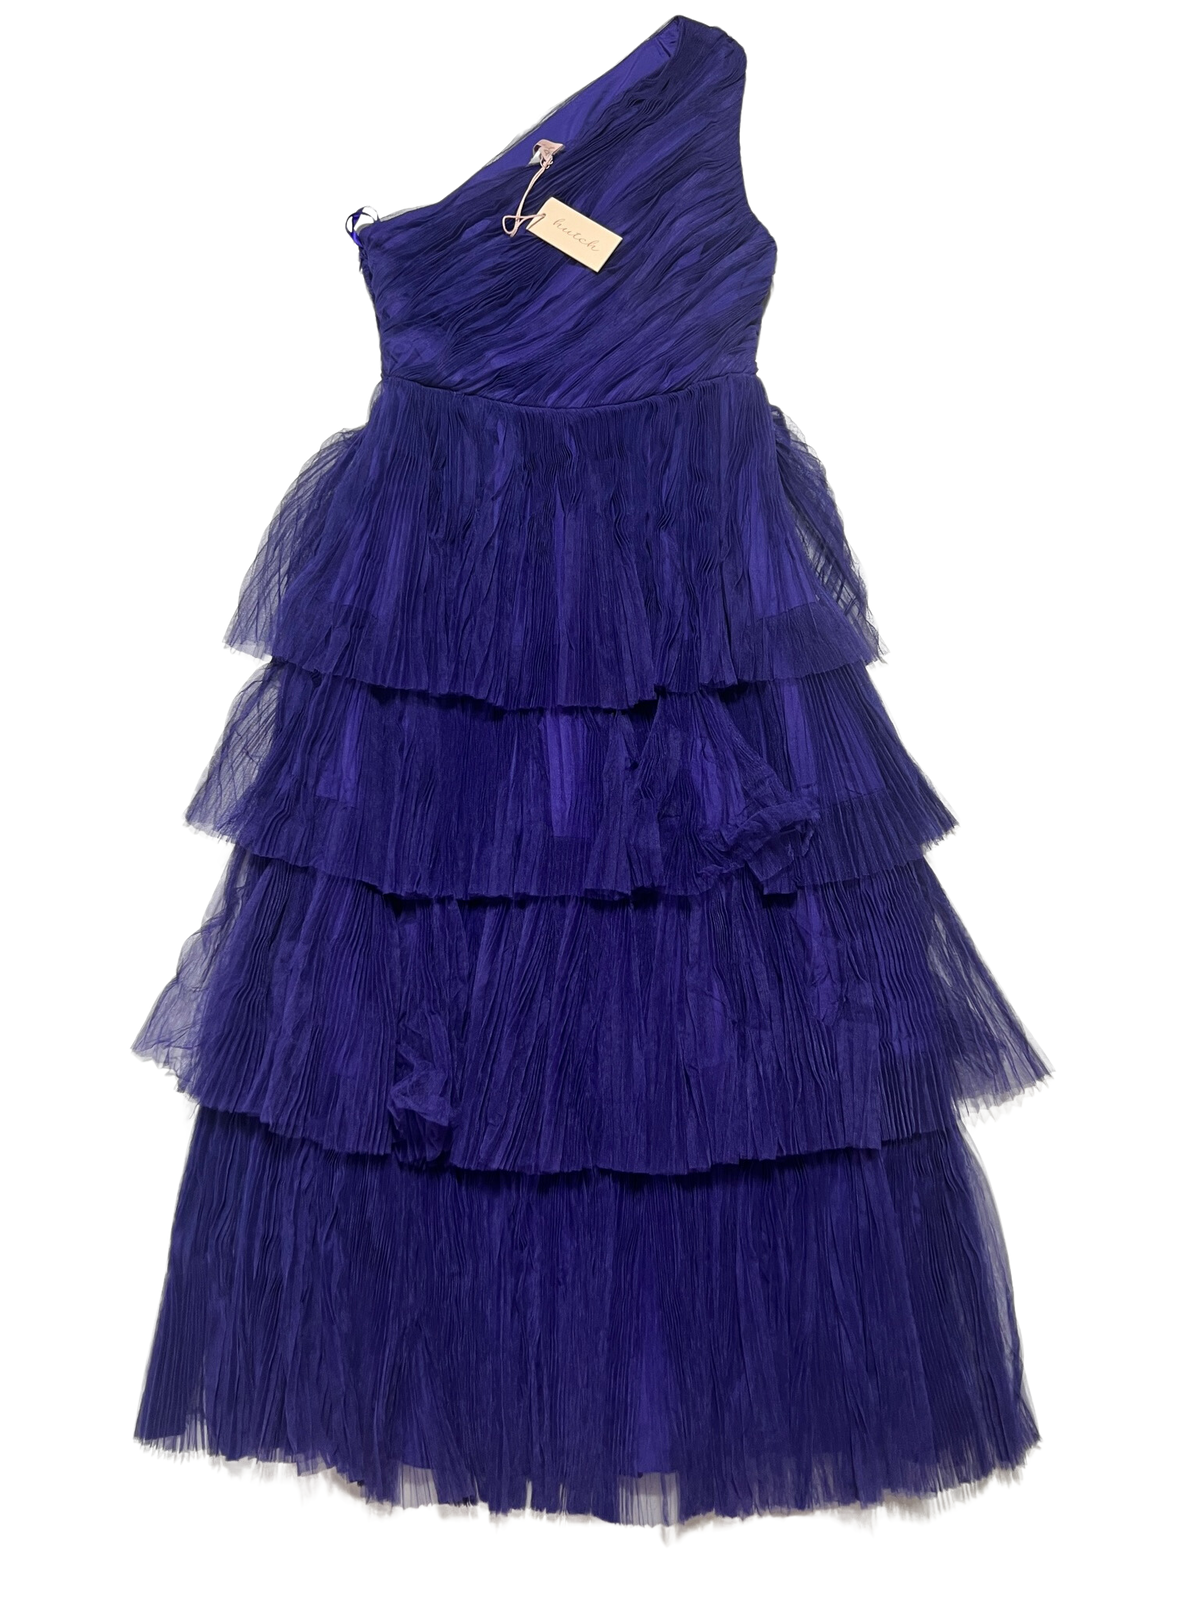 Hutch- Purple Tulle Maxi Dress NEW WITH TAGS!